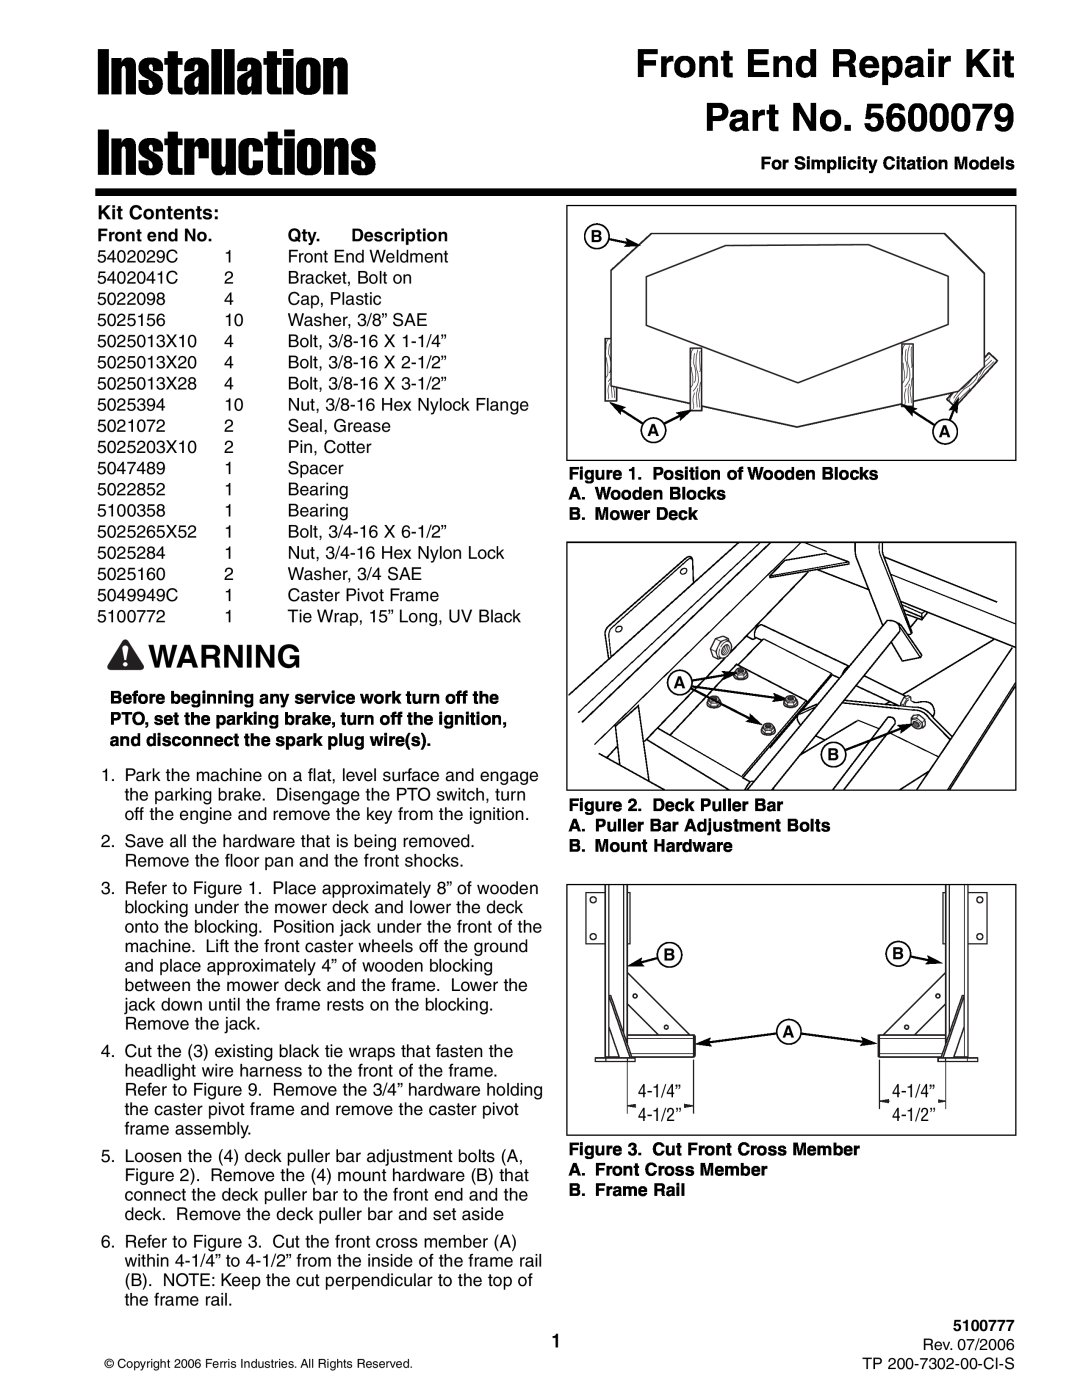 Simplicity 200-7302-00-CI-S, 5600079 installation instructions Installation Instructions, Front End Repair Kit Part No 